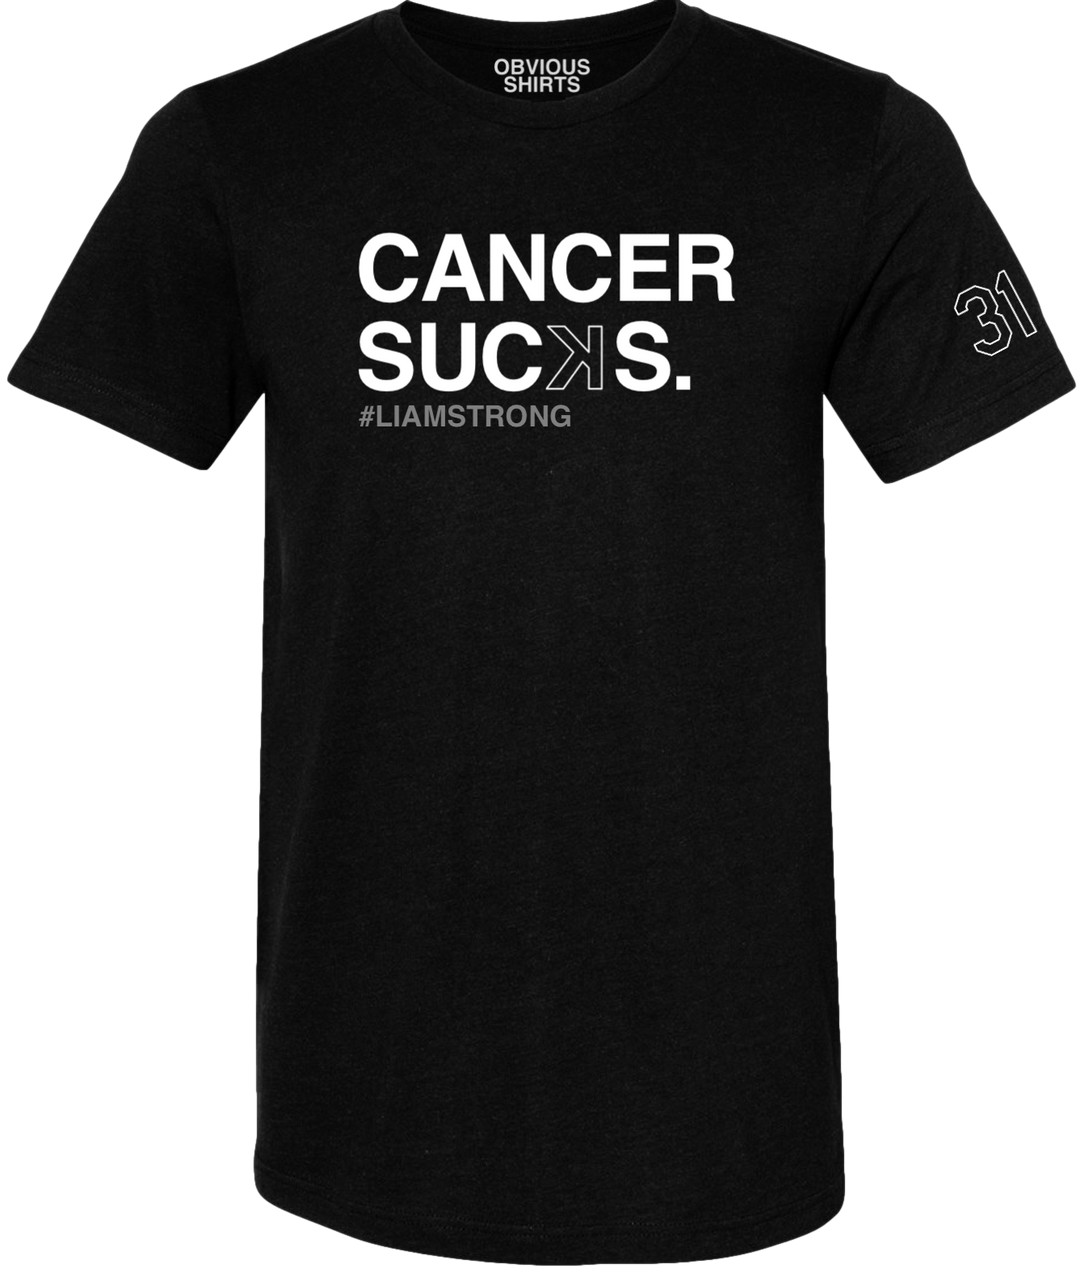 CANCER SUCꓘS. - OBVIOUS SHIRTS